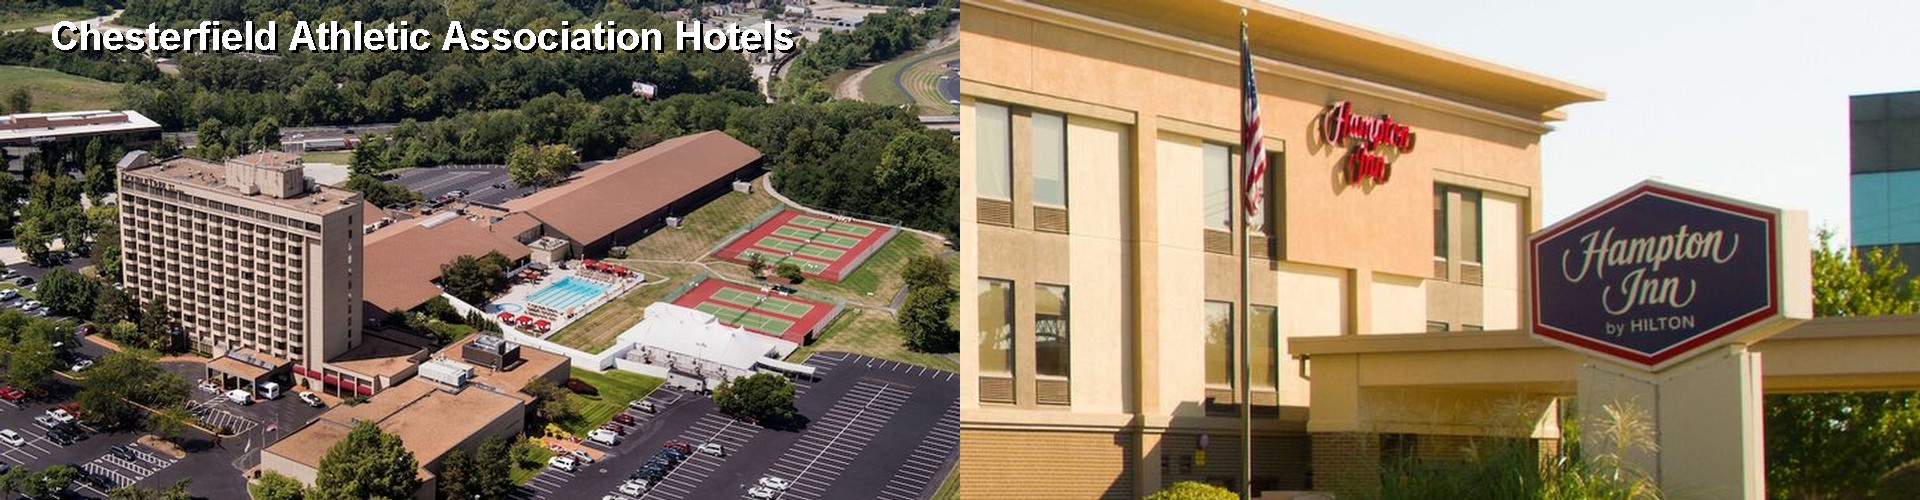 5 Best Hotels near Chesterfield Athletic Association